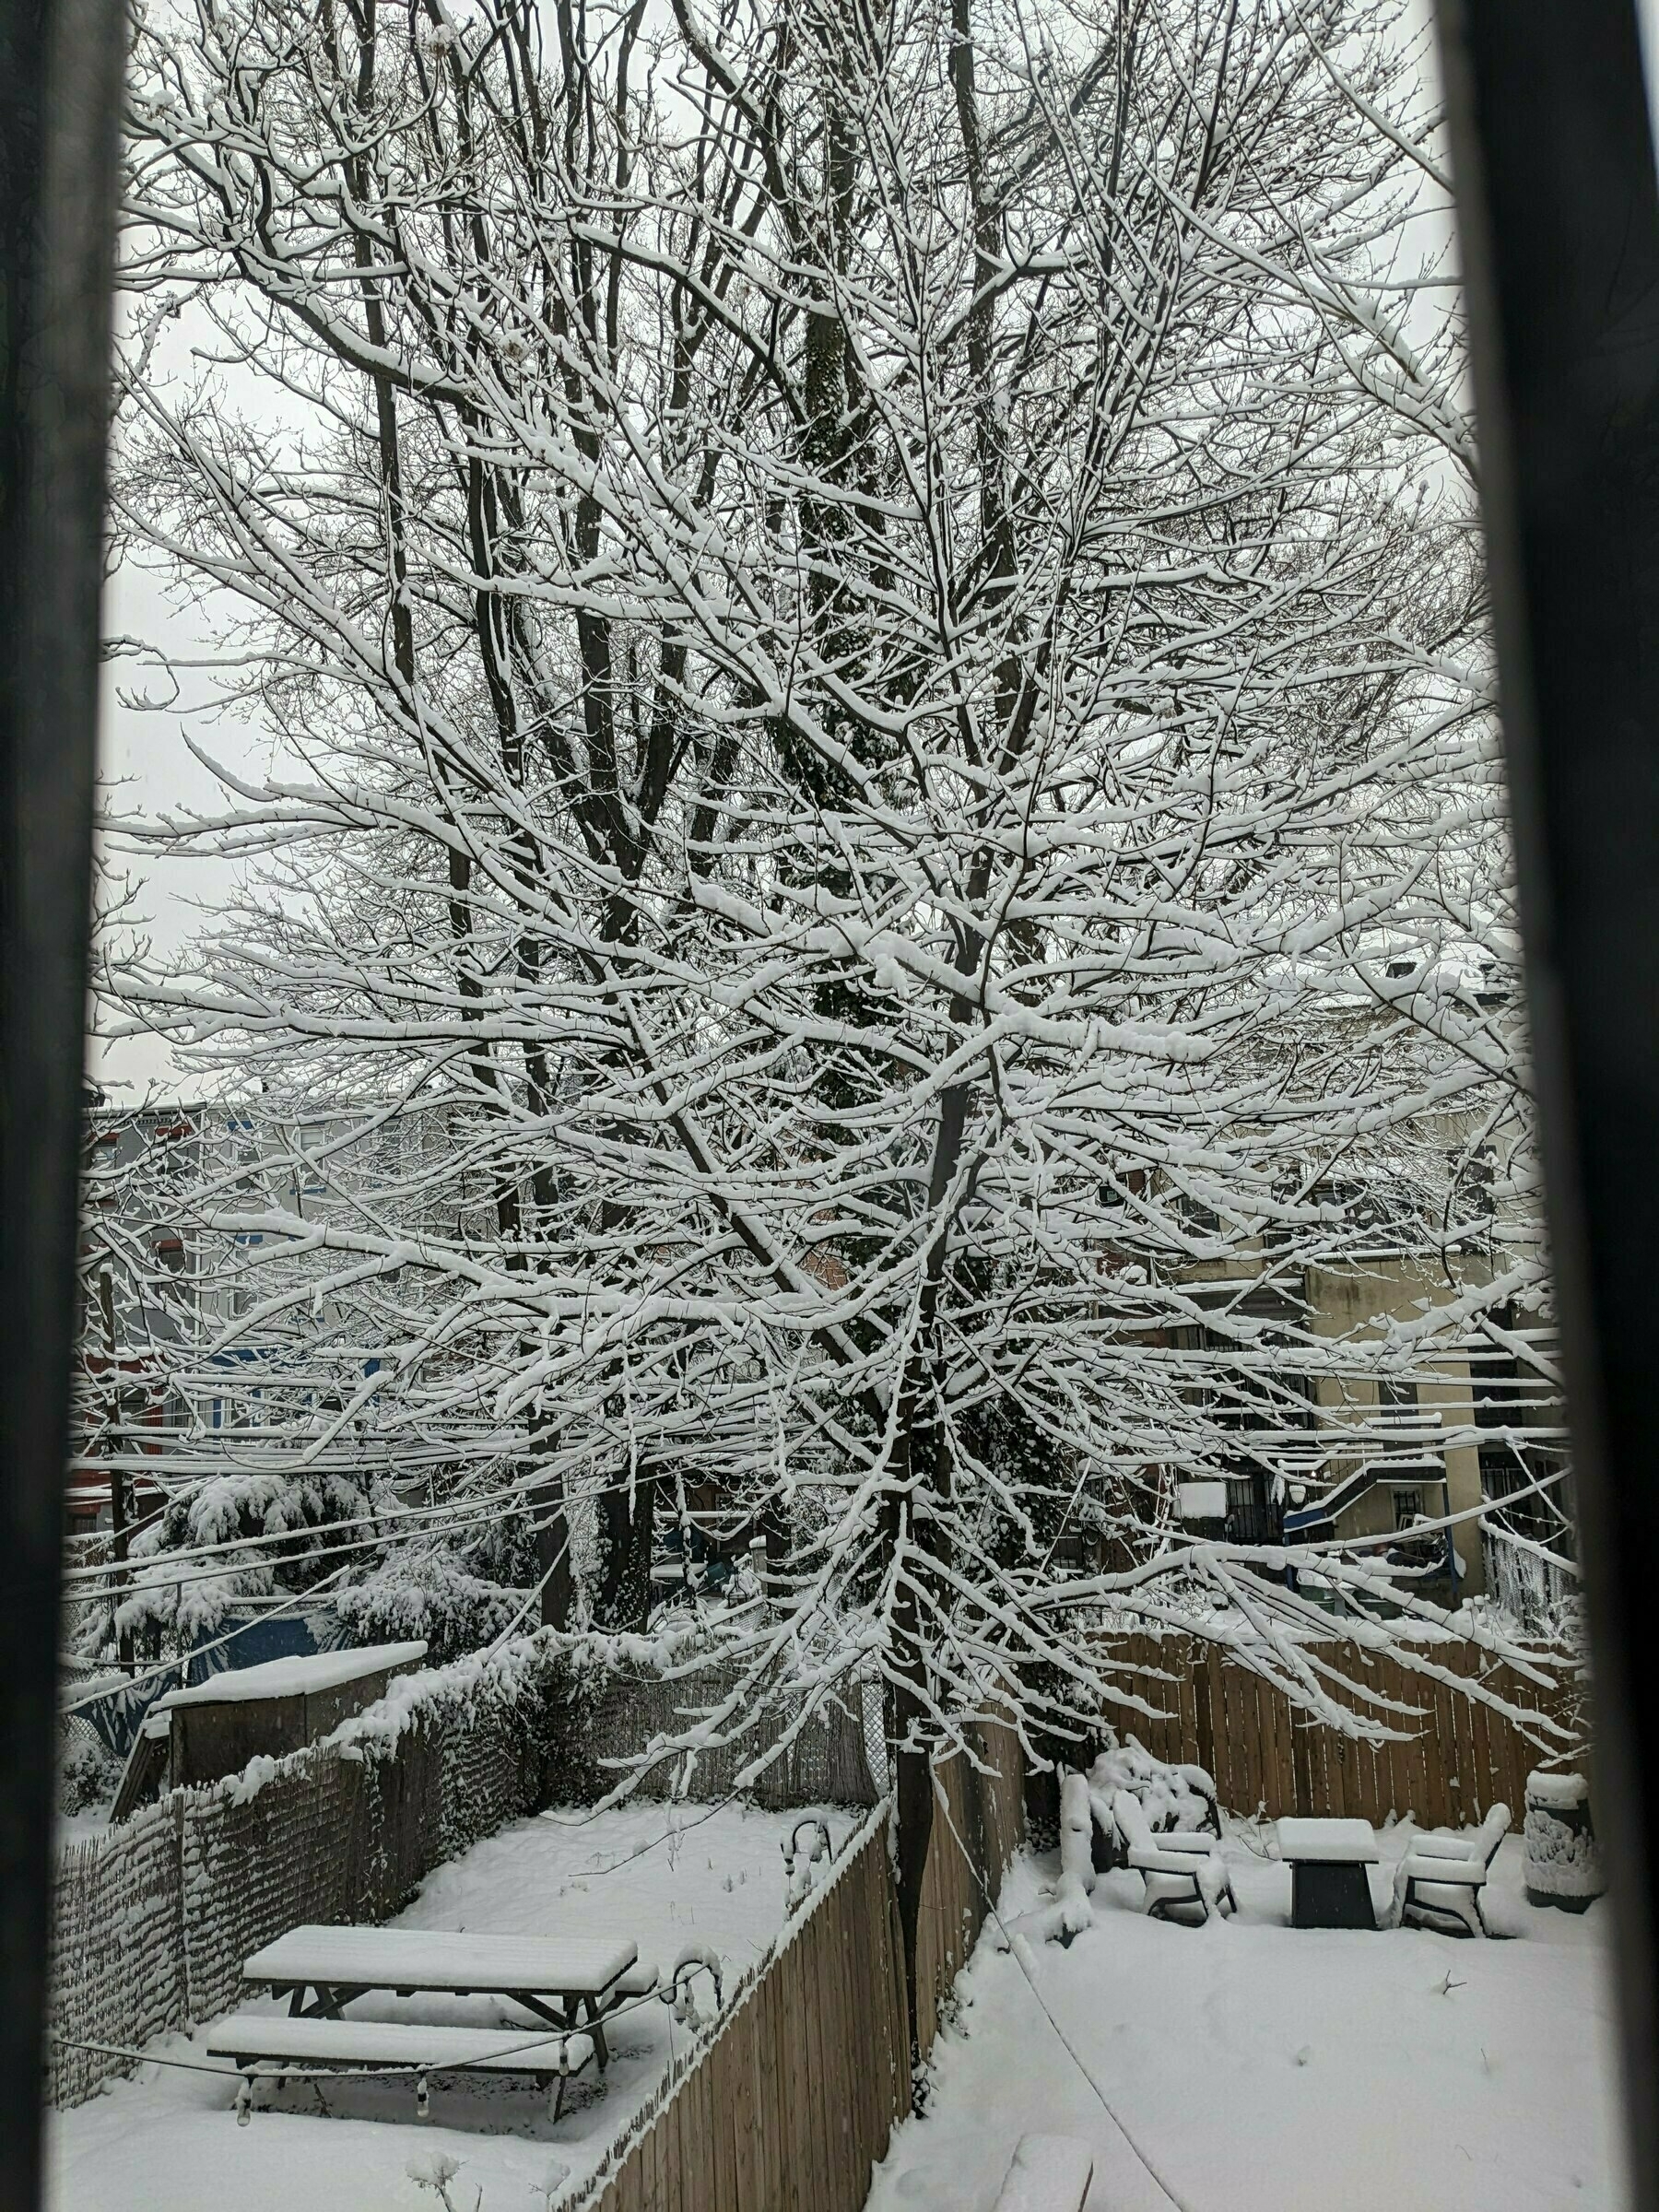 Snow-covered tree branches seen through a window